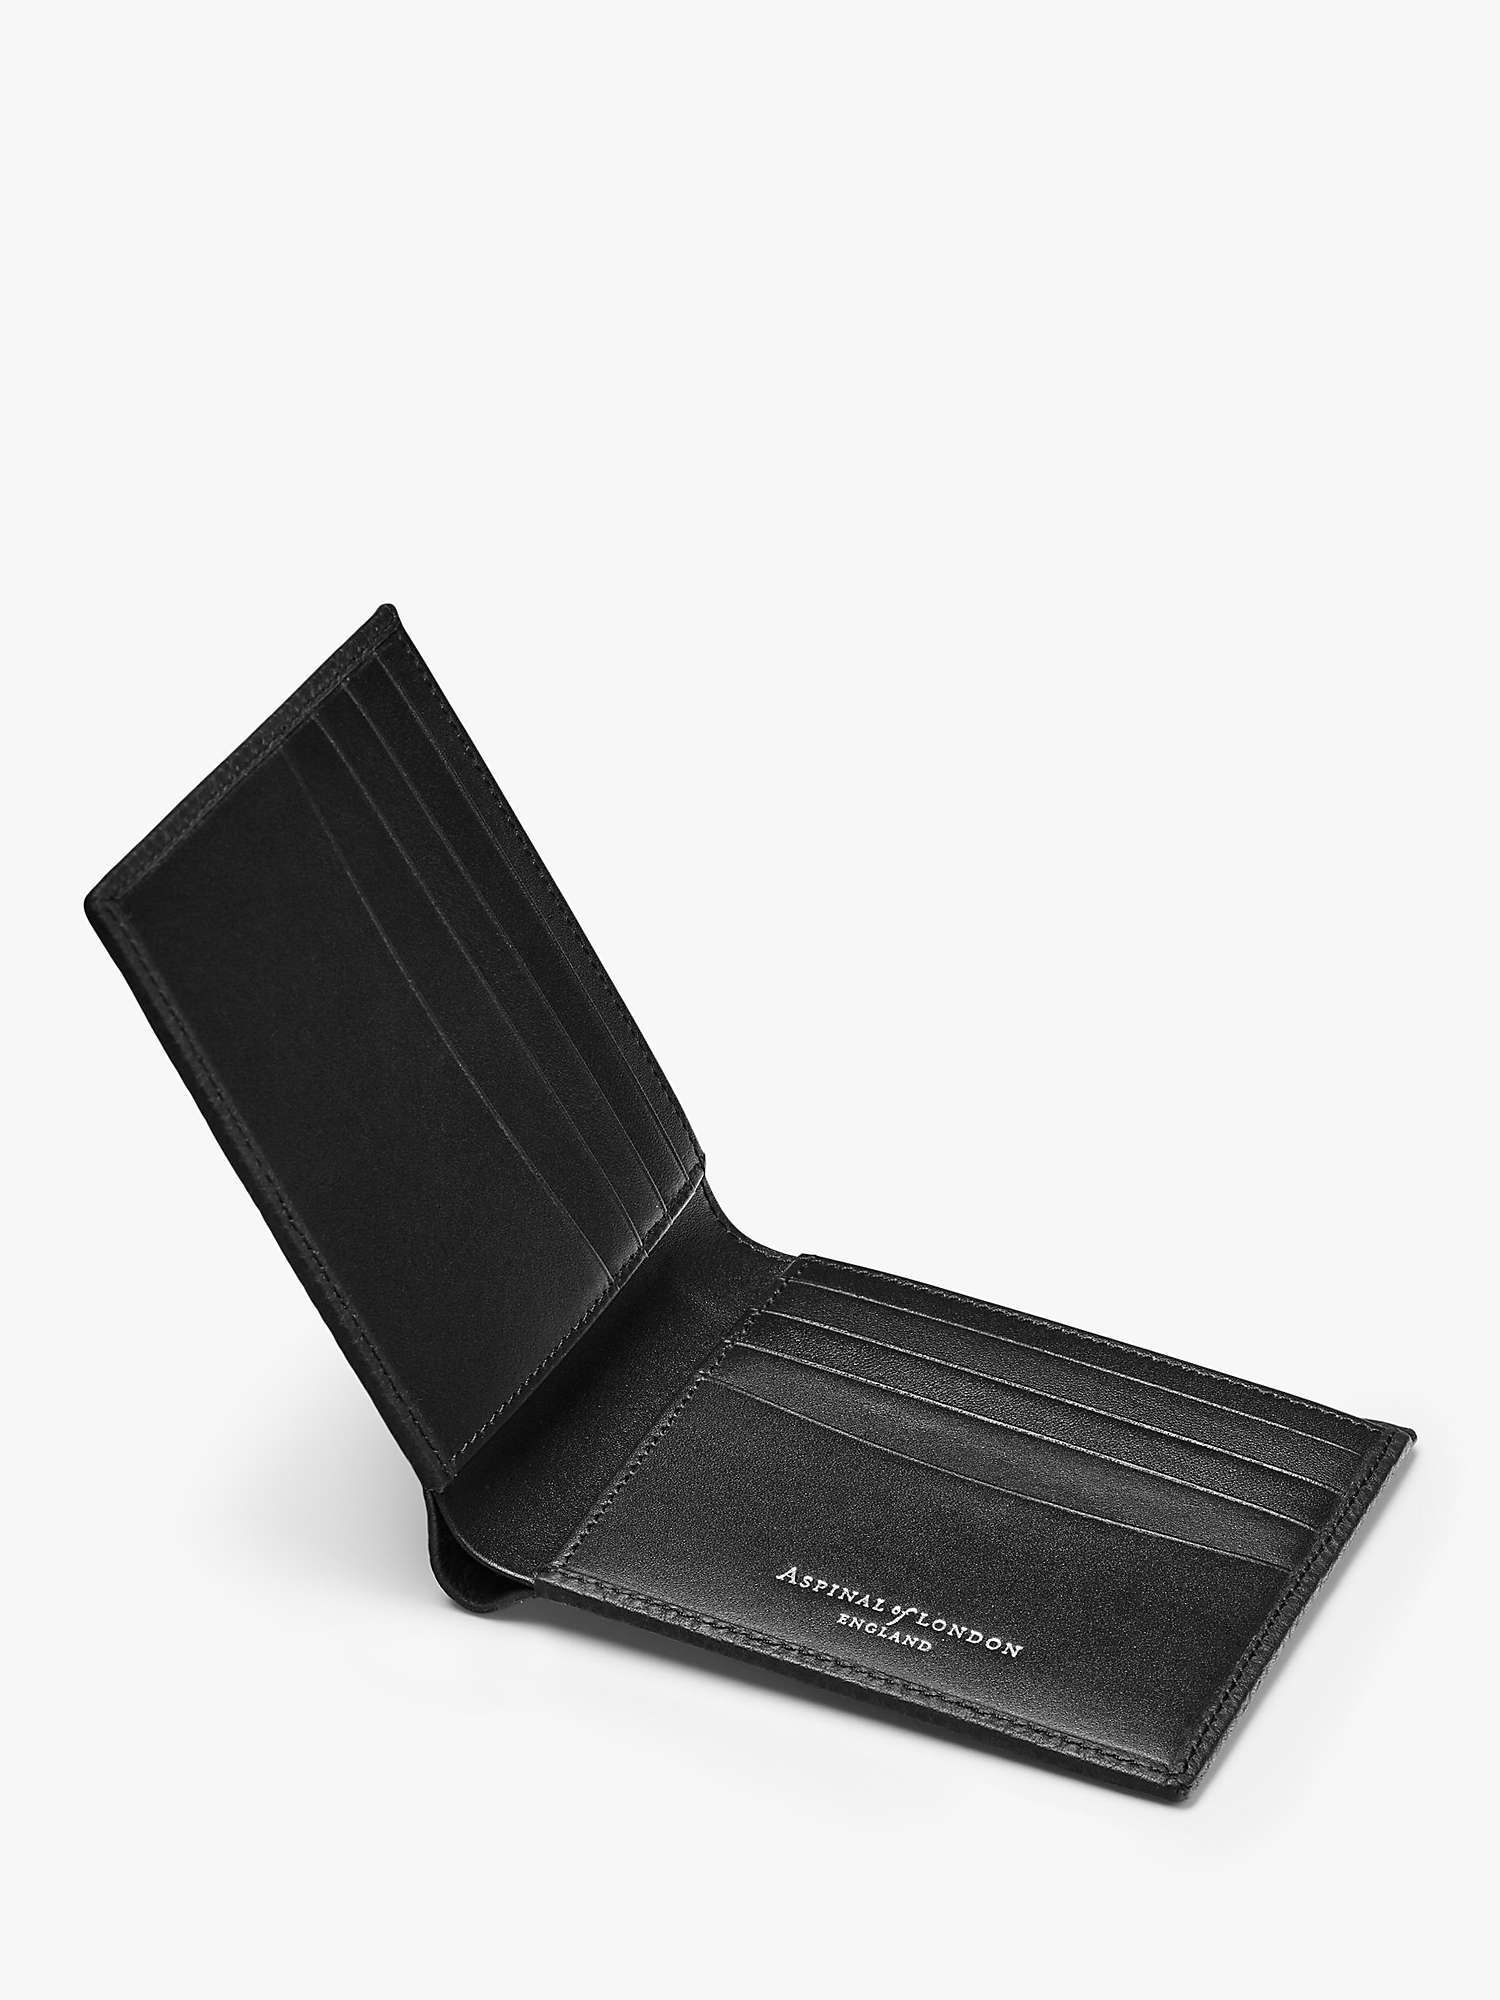 Buy Aspinal of London 8 Card Billfold Pebble Leather Coin Wallet Online at johnlewis.com